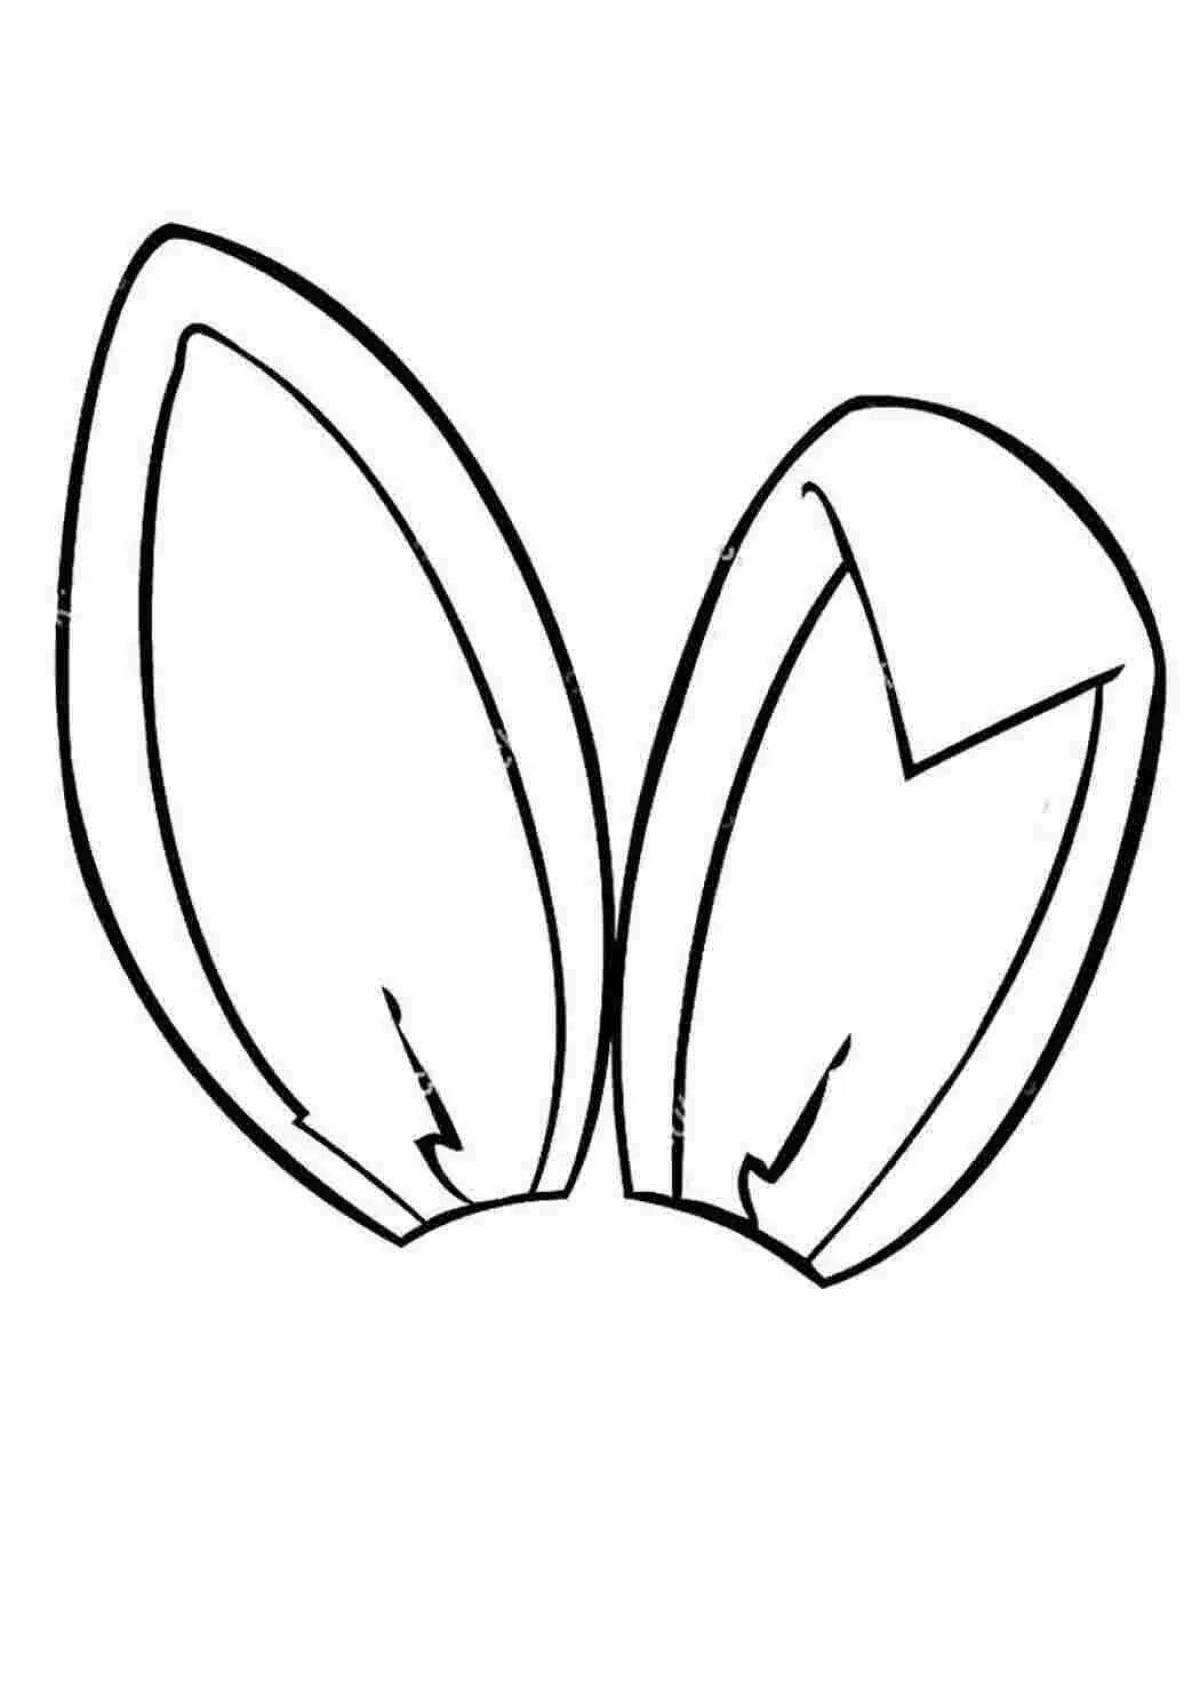 Outstanding kids ear coloring page